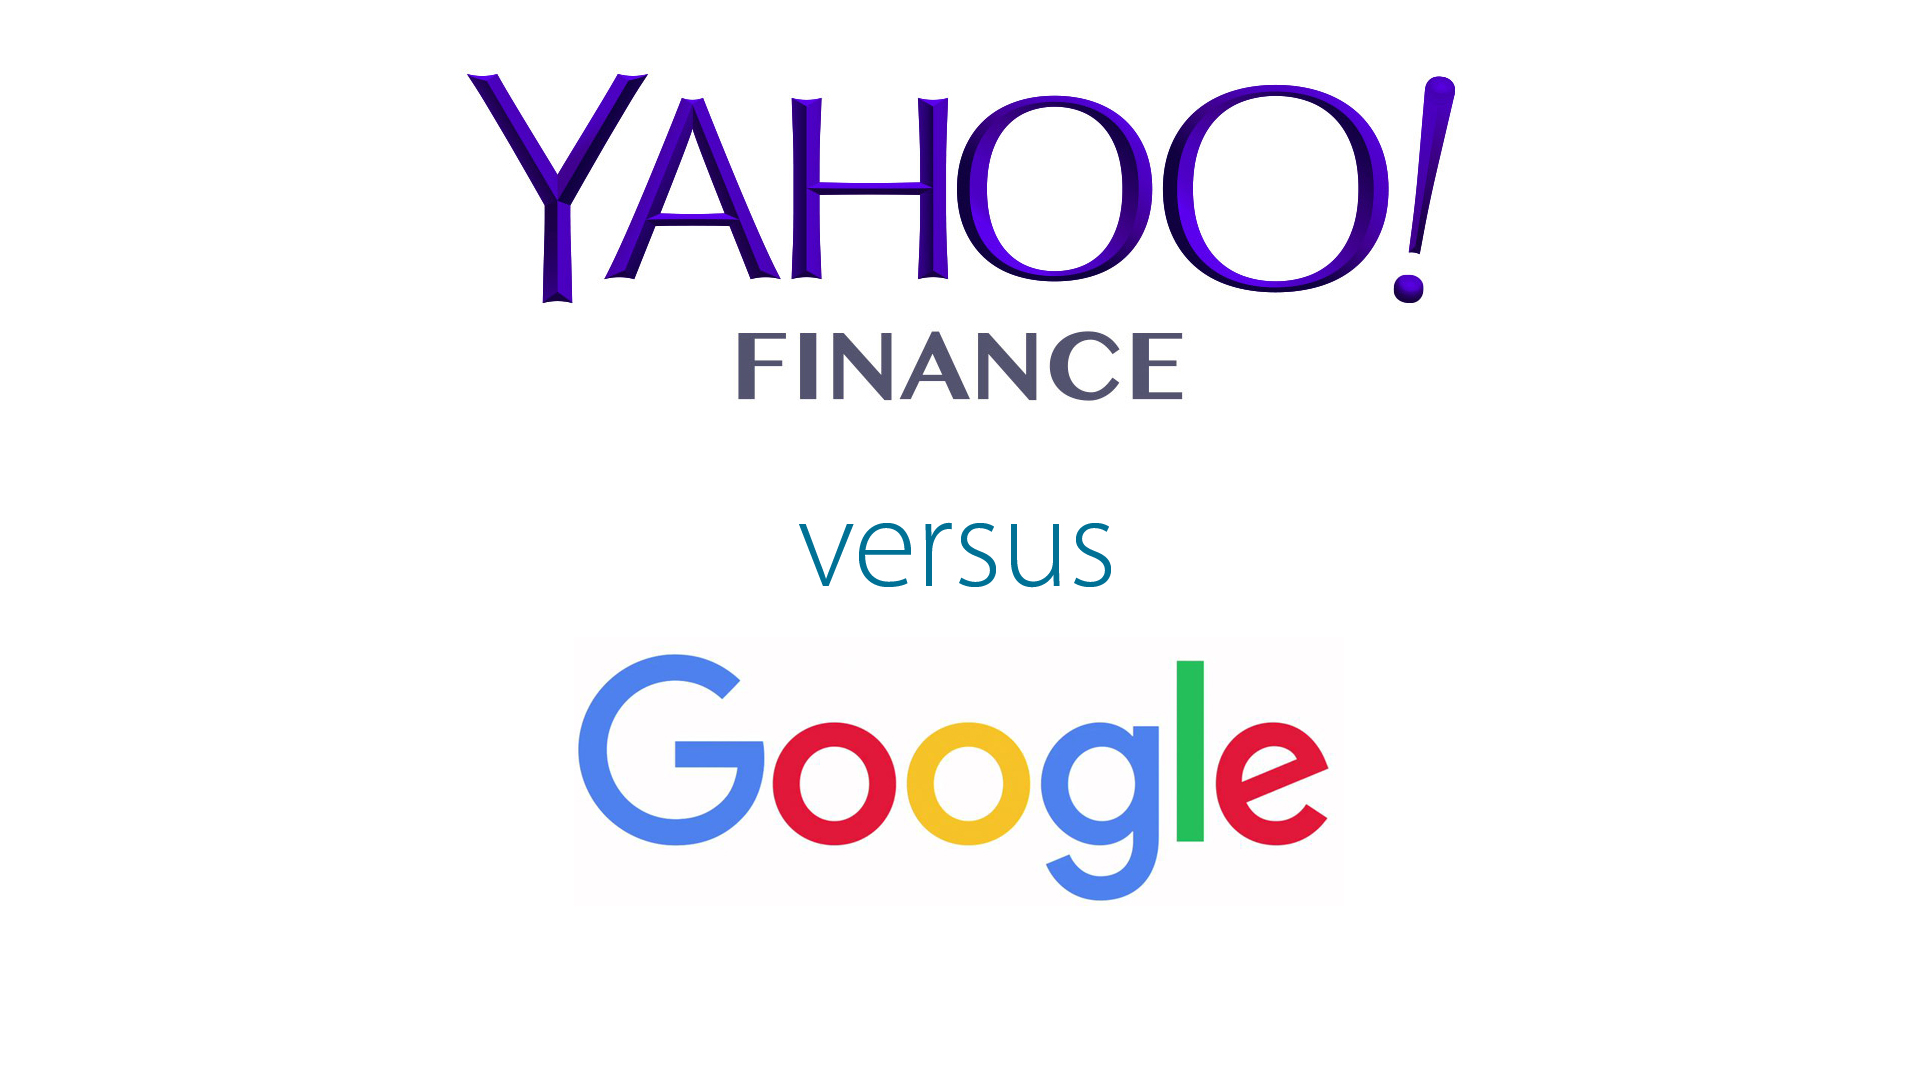 yahoo-finance-vs-google-finance-get-irked-learn-how-to-invest-in